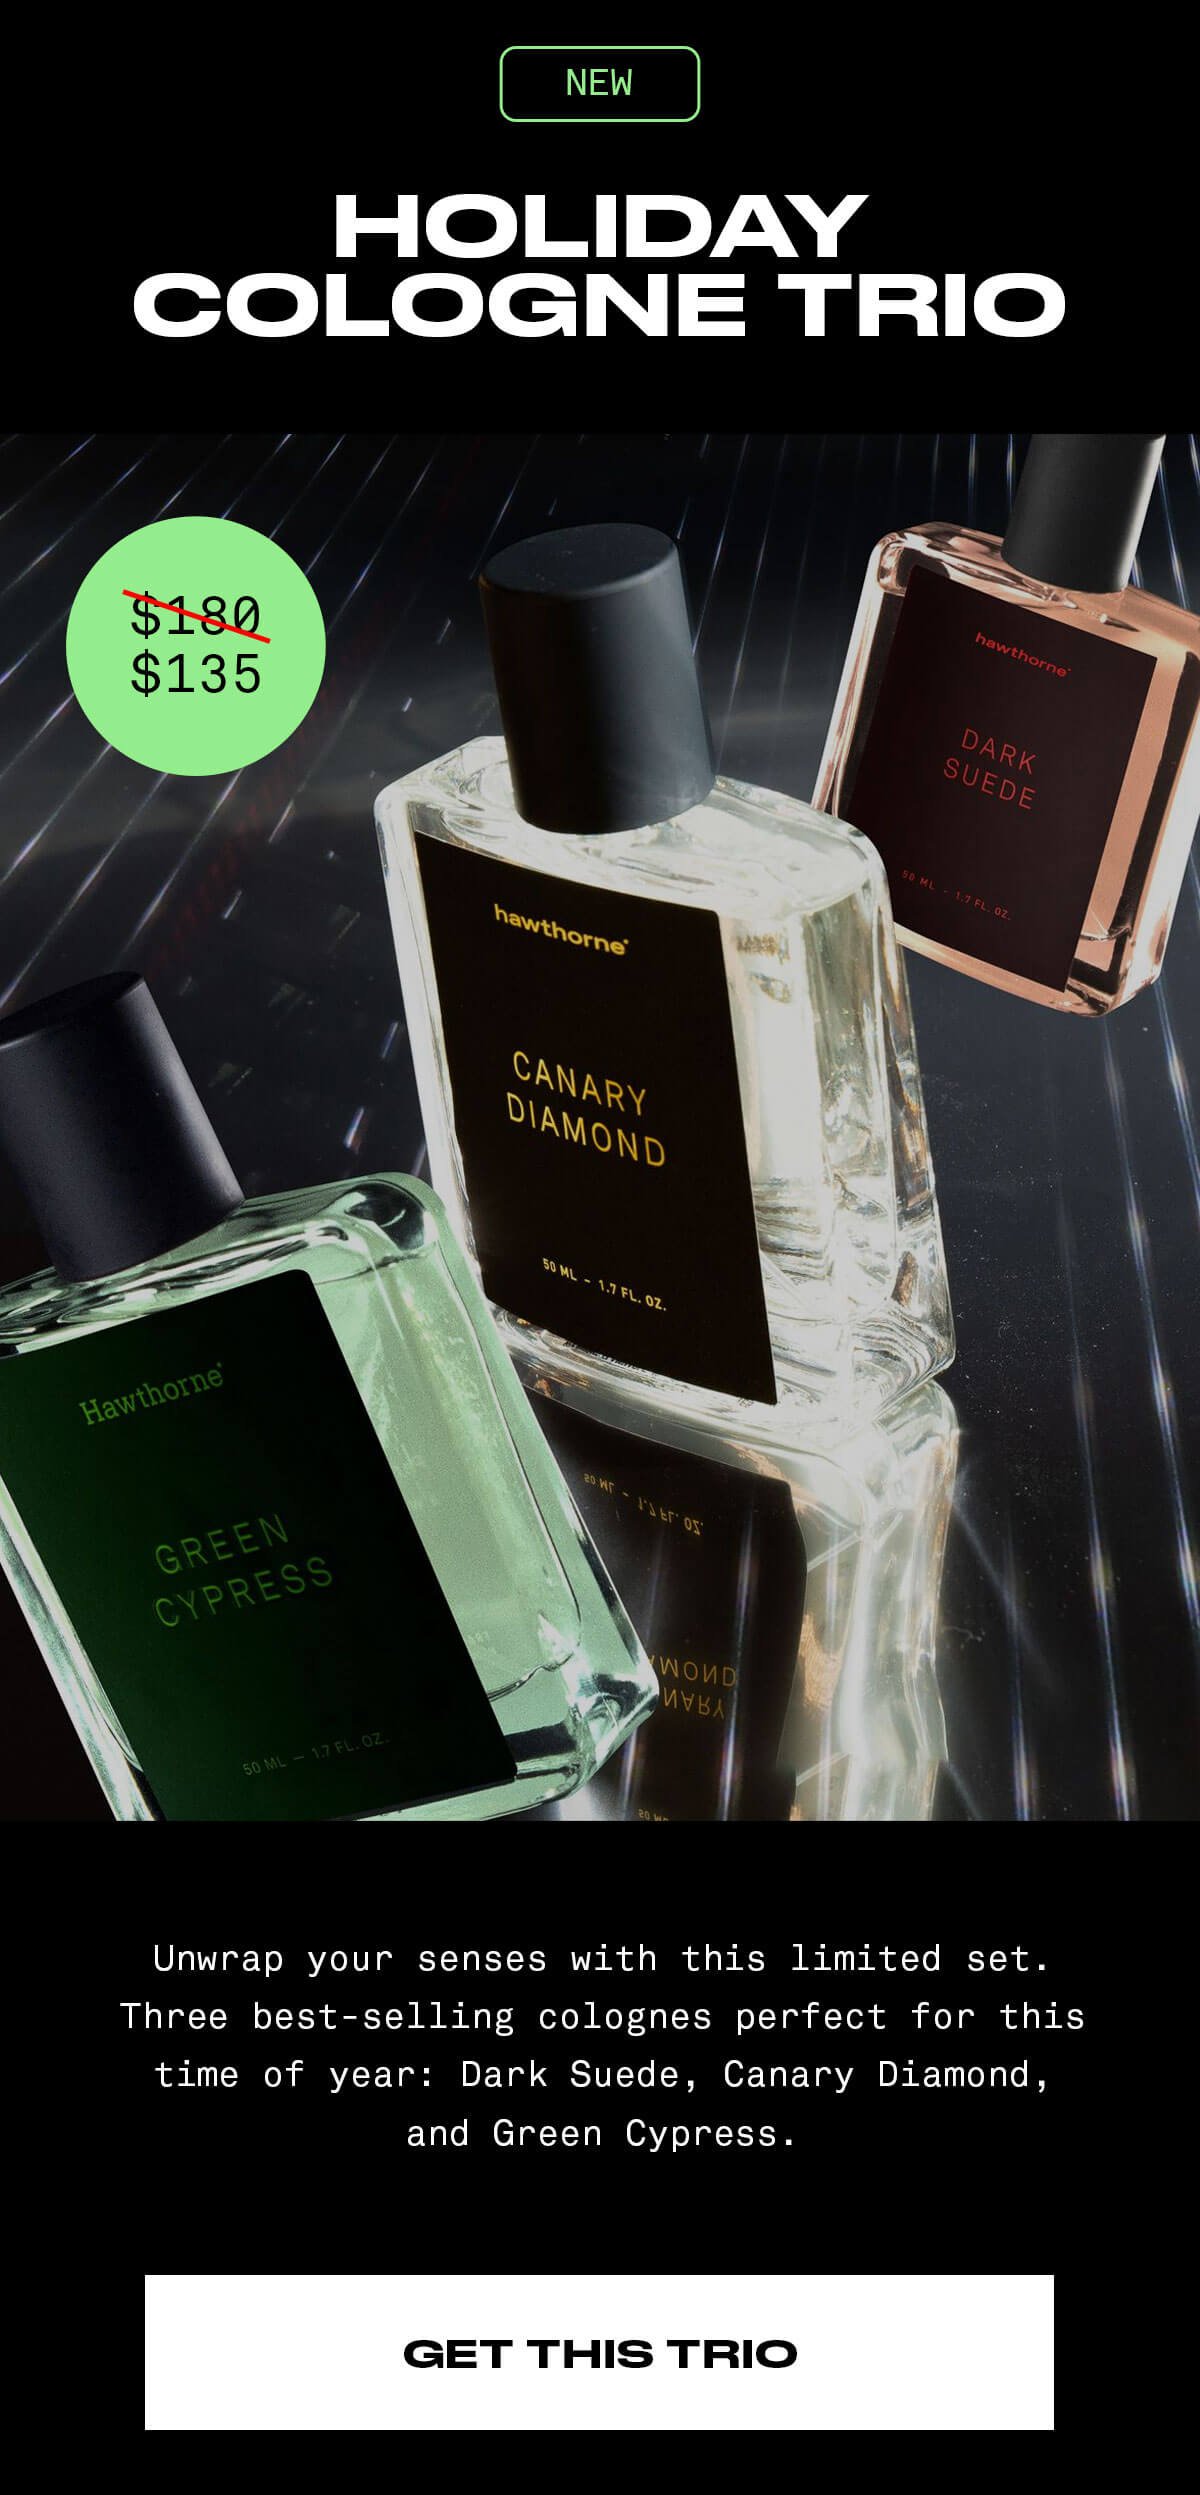 NEW HOLIDAY COLOGNE TRIO Unwrap your senses with this limitede set. Three best-selling colognes perfect for this time of year: Dark Suede, Canady Diamond, and Green Cypress. GET THIS TRIO